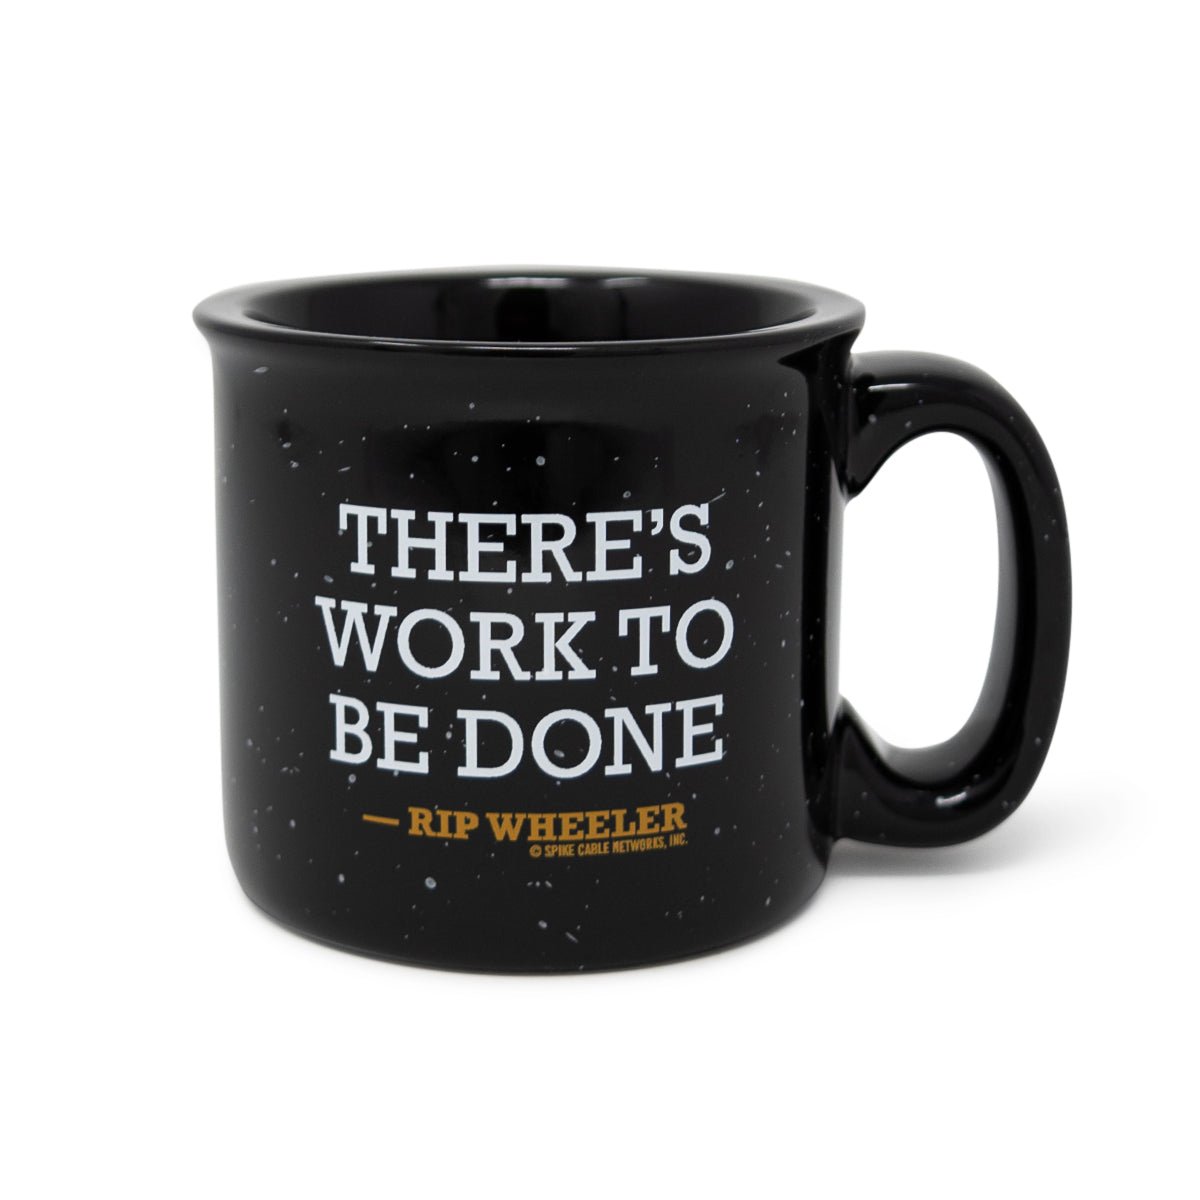 Yellowstone Rip Wheeler There's Work to Be Done 12 oz Campfire Mug - Paramount Shop